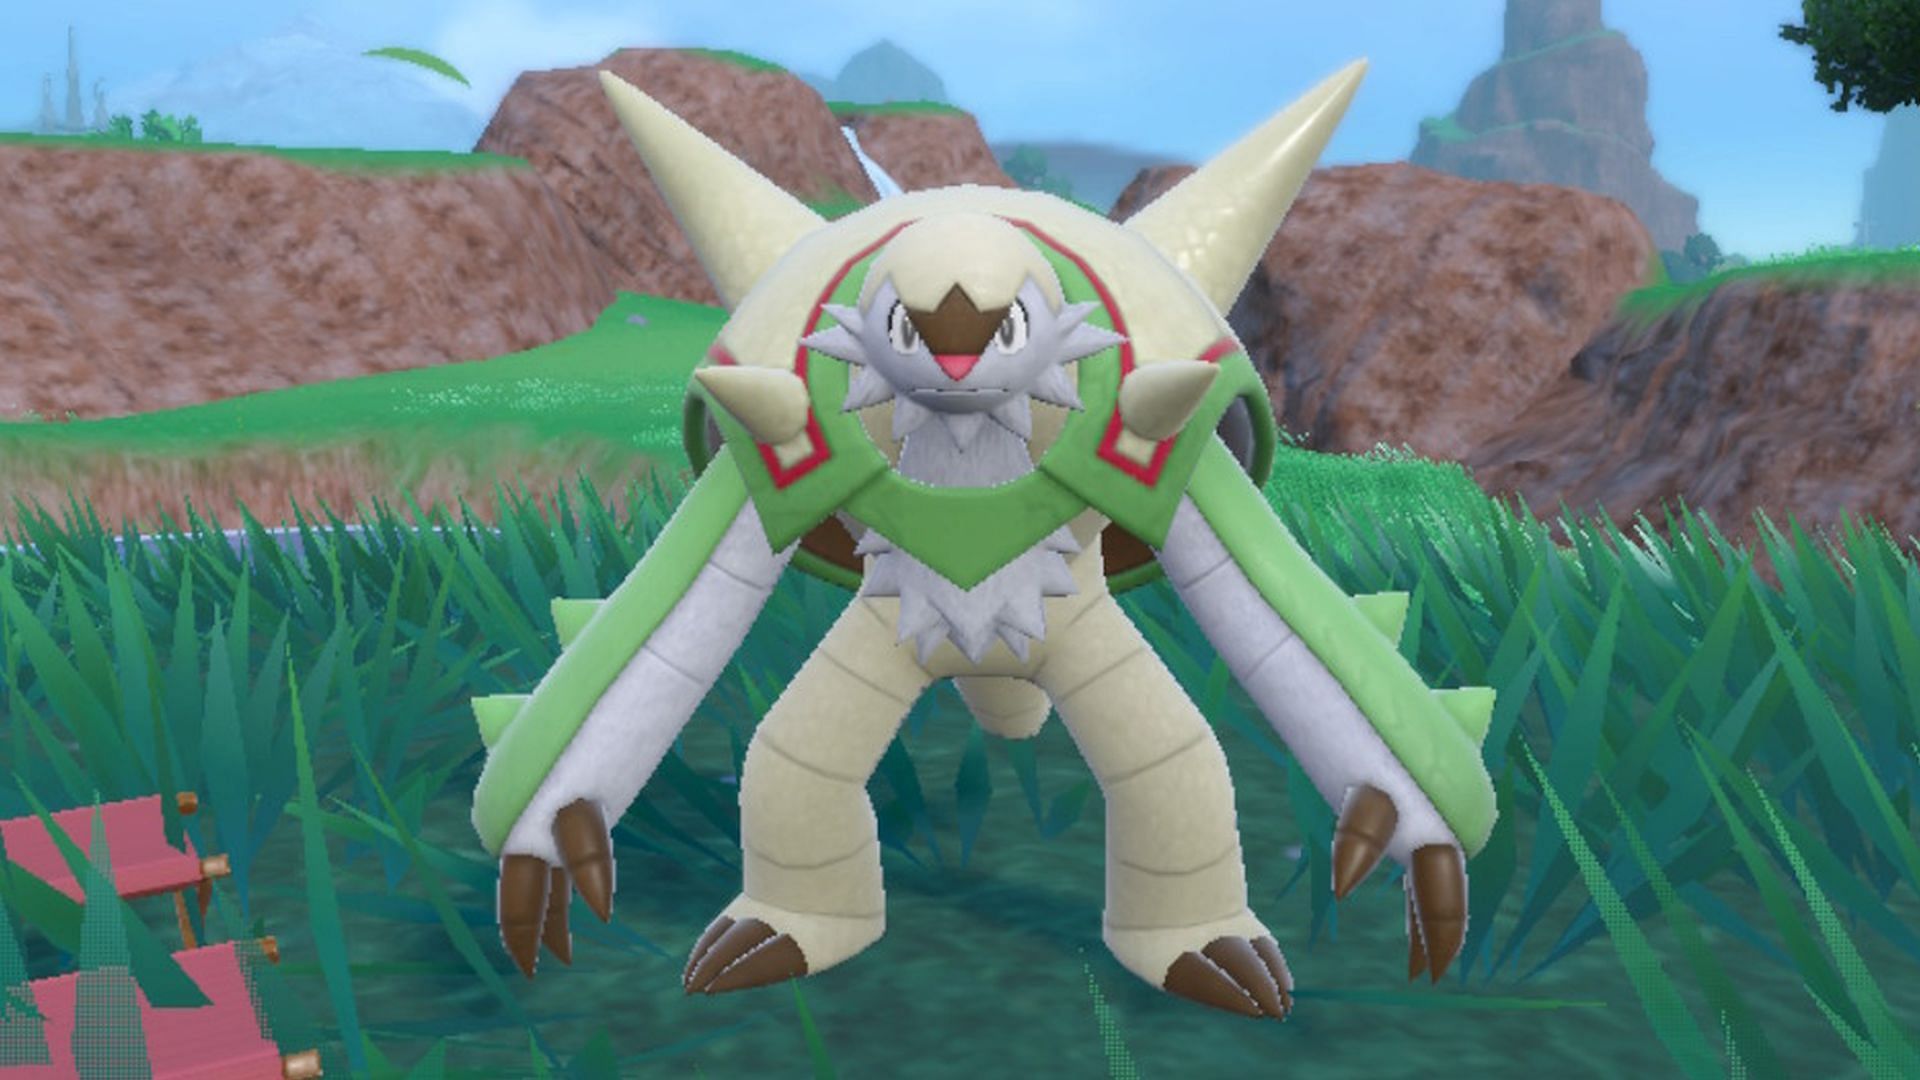 This Grass starter has plenty of fans who wish to build it for PvP battles